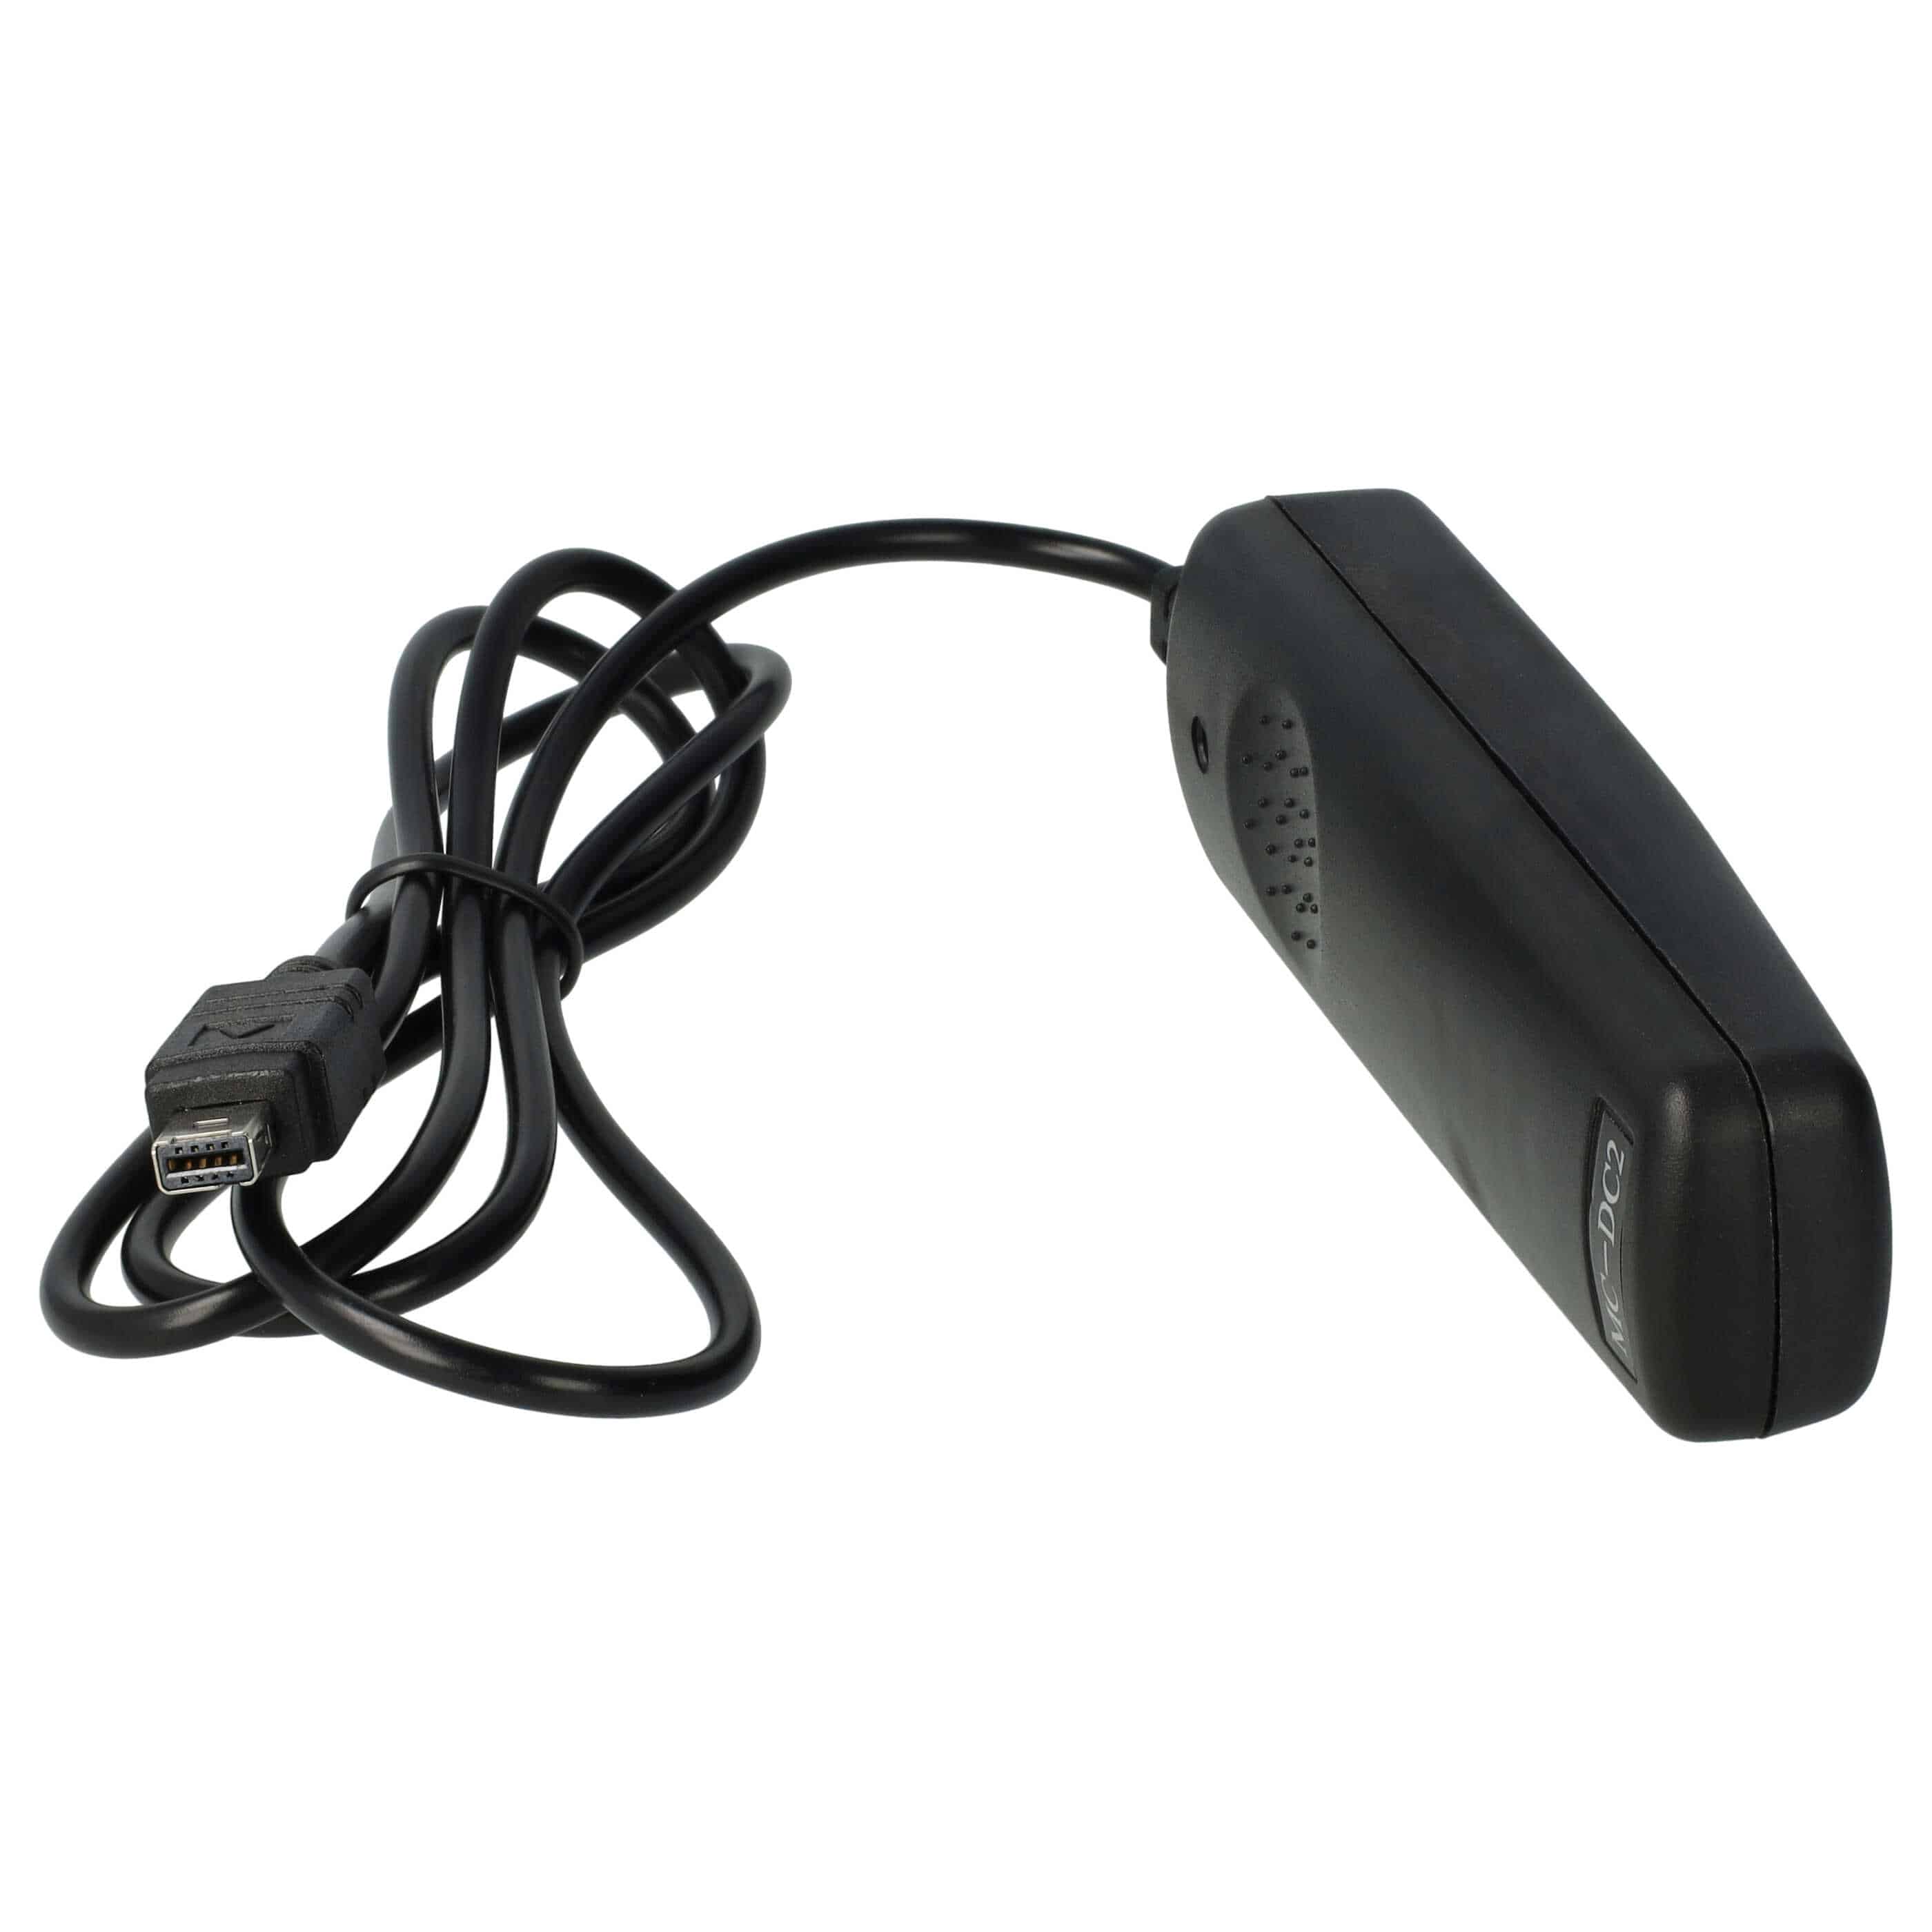 Remote Trigger as Exchange for Nikon MC-DC2 for Camera 2-Step Shutter, 1 m Lead